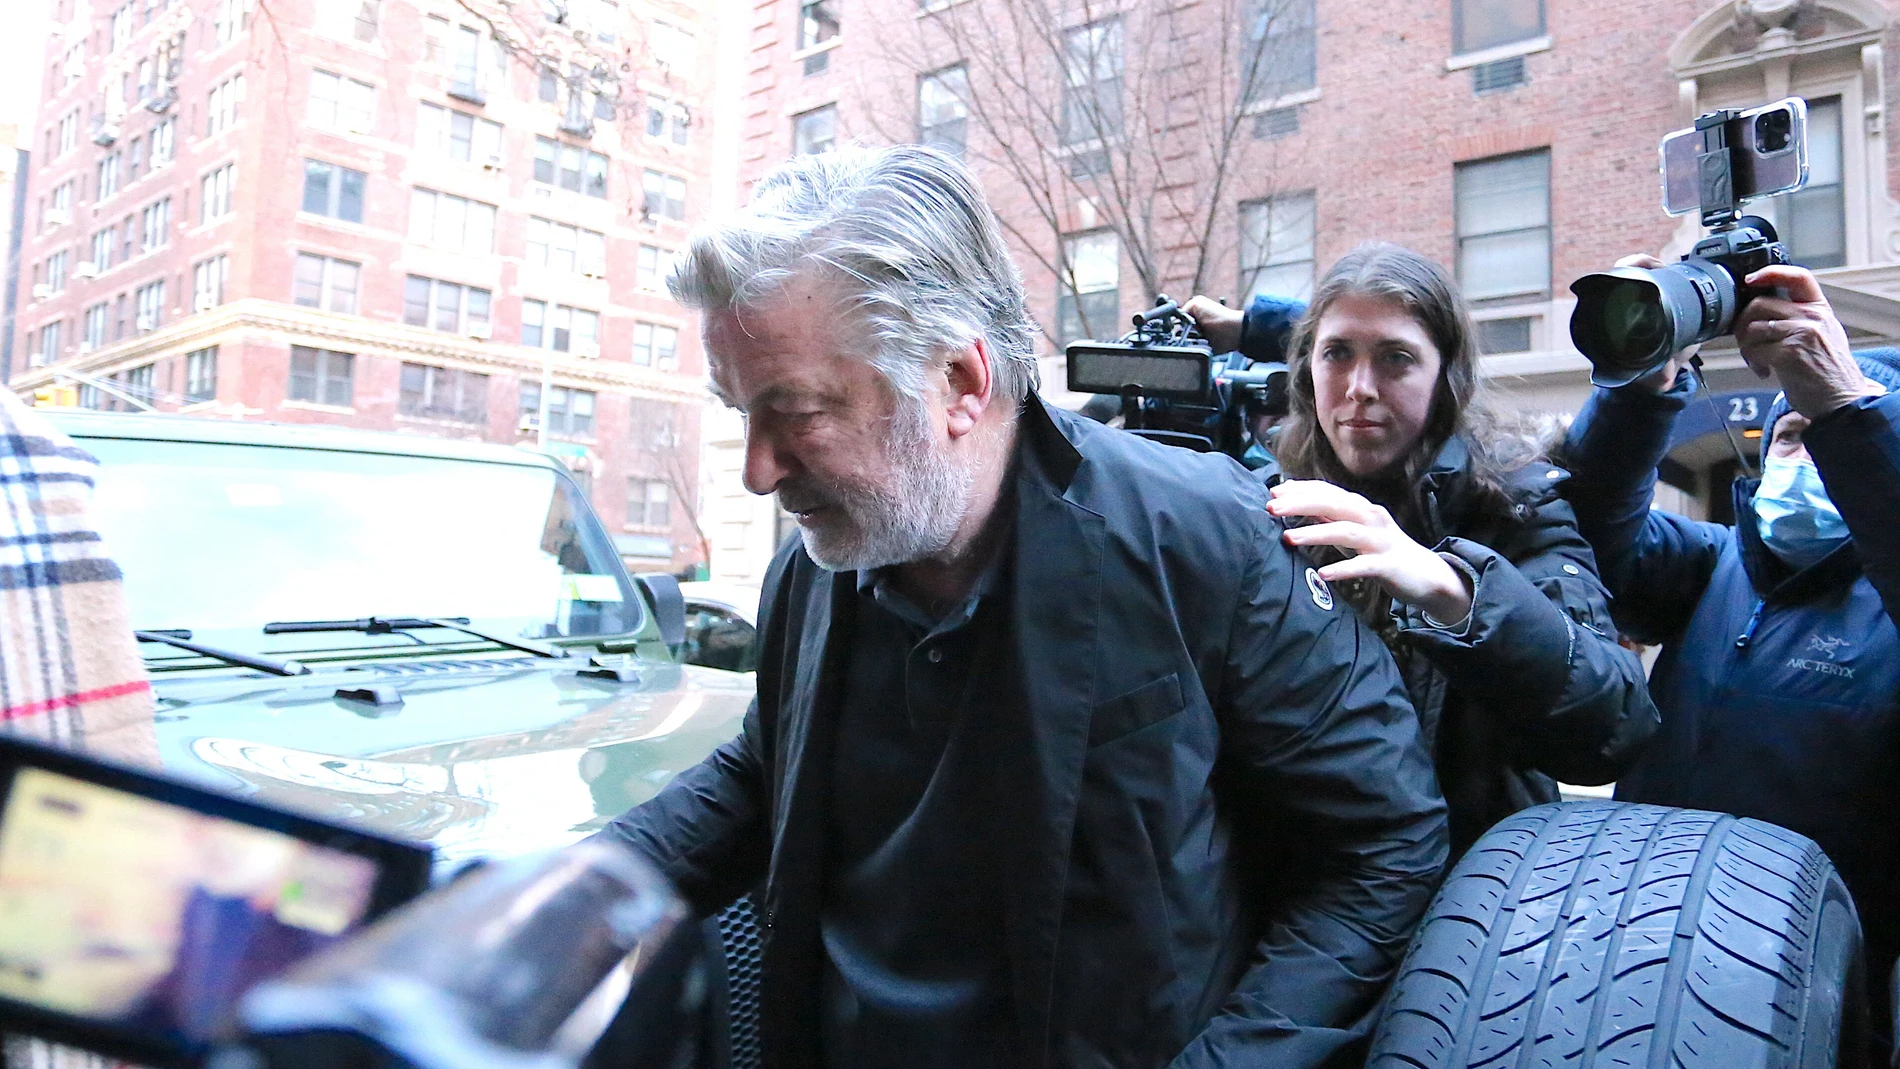 Actor Alec Baldwin in New York, NY on January 20, 2023.